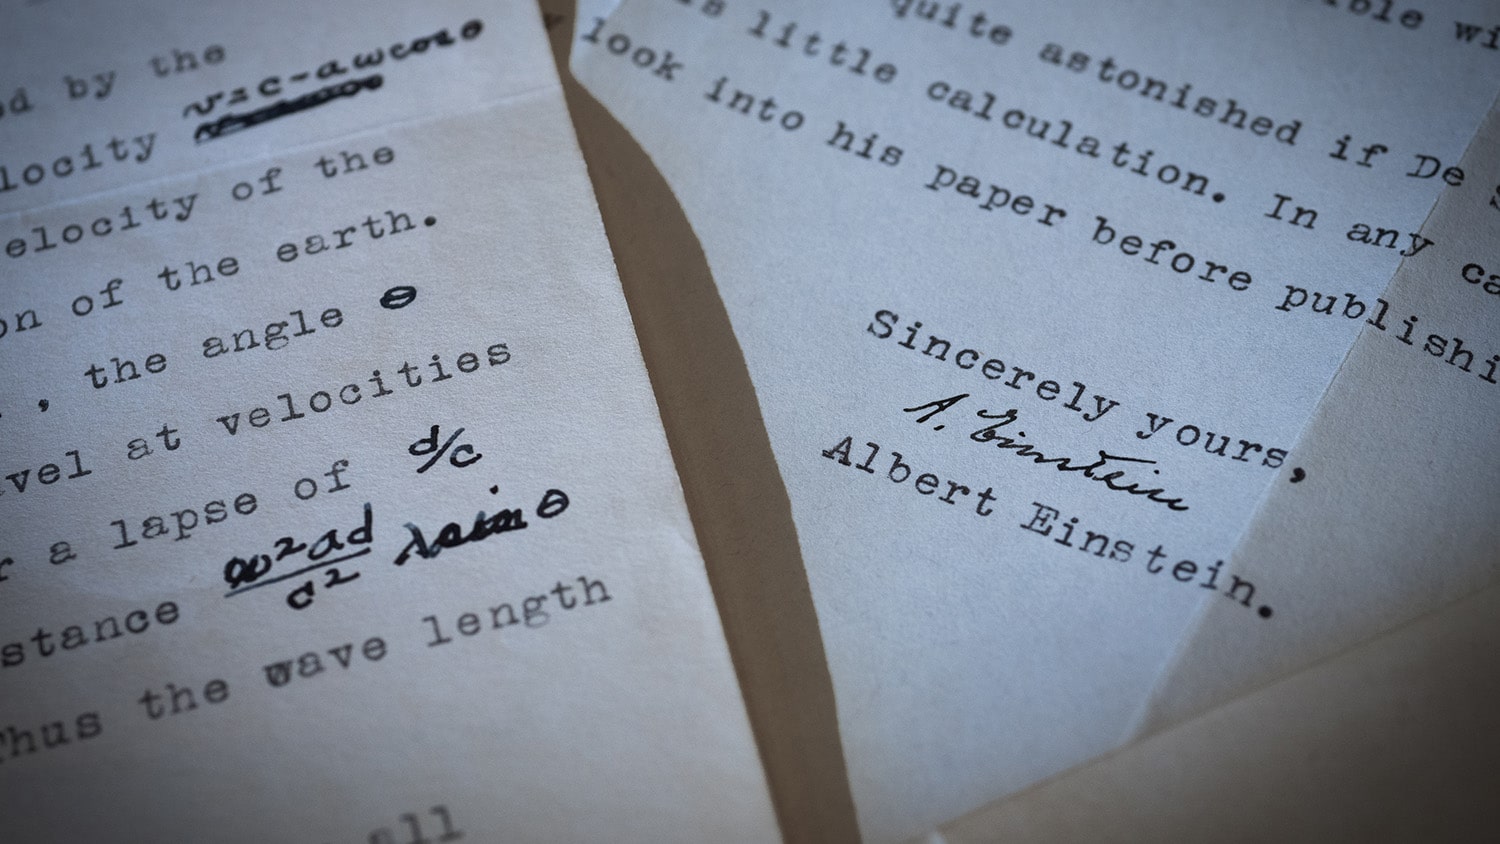 The two pages of Albert Einstein's letter to the late NC State mathematics professor Raimond Struble are shown side by side.